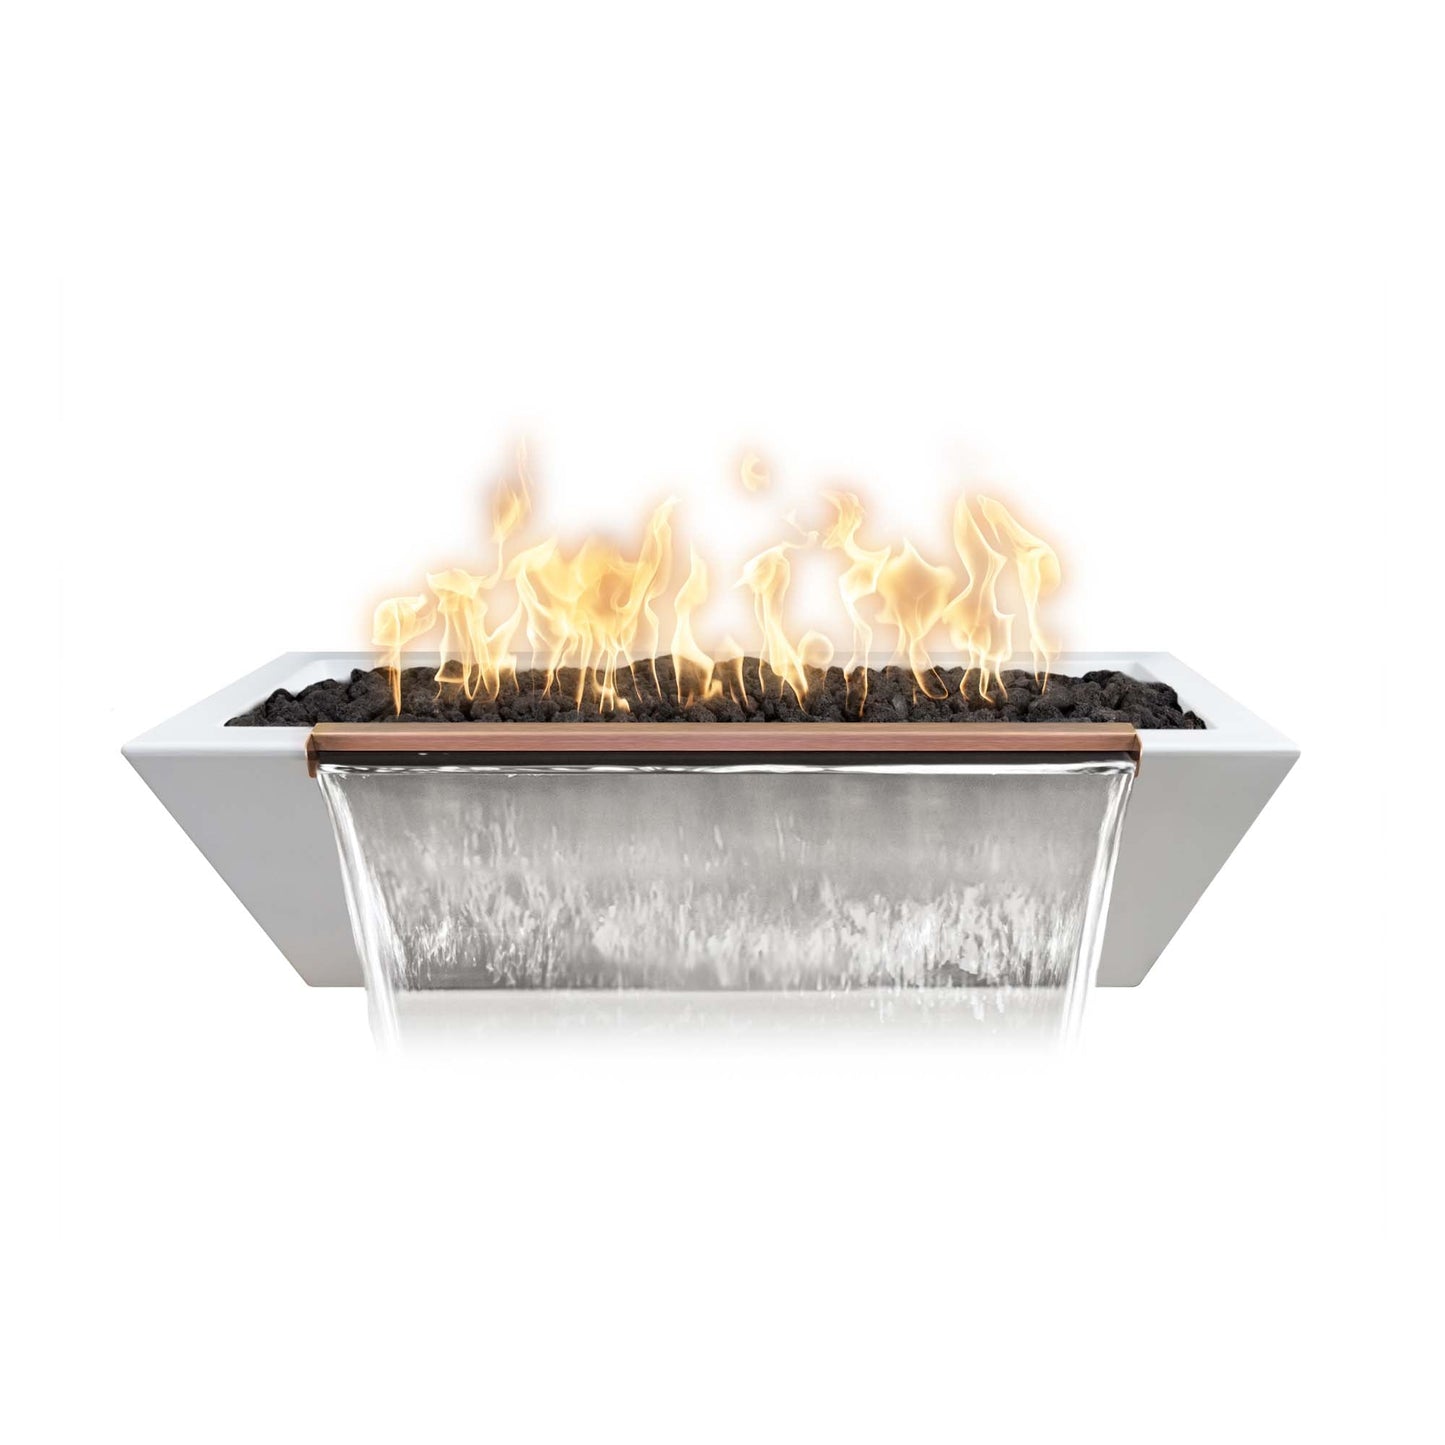 The Outdoor Plus Linear Maya 60" Rustic Moss Stone GFRC Concrete Natural Gas Fire & Water Bowl with 12V Electronic Ignition